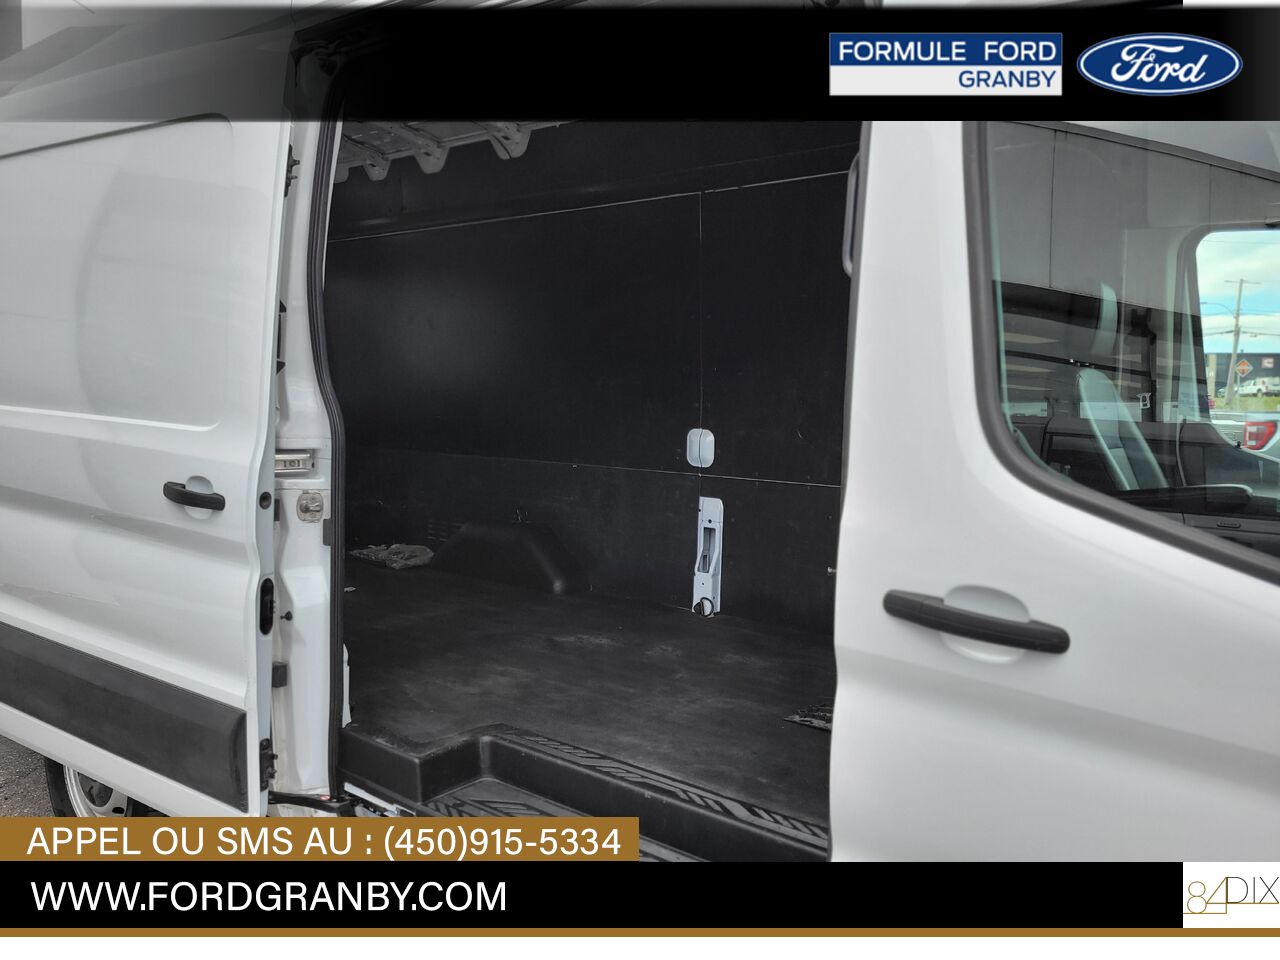 2020 Ford Transit fourgon utilitaire Granby - photo #14